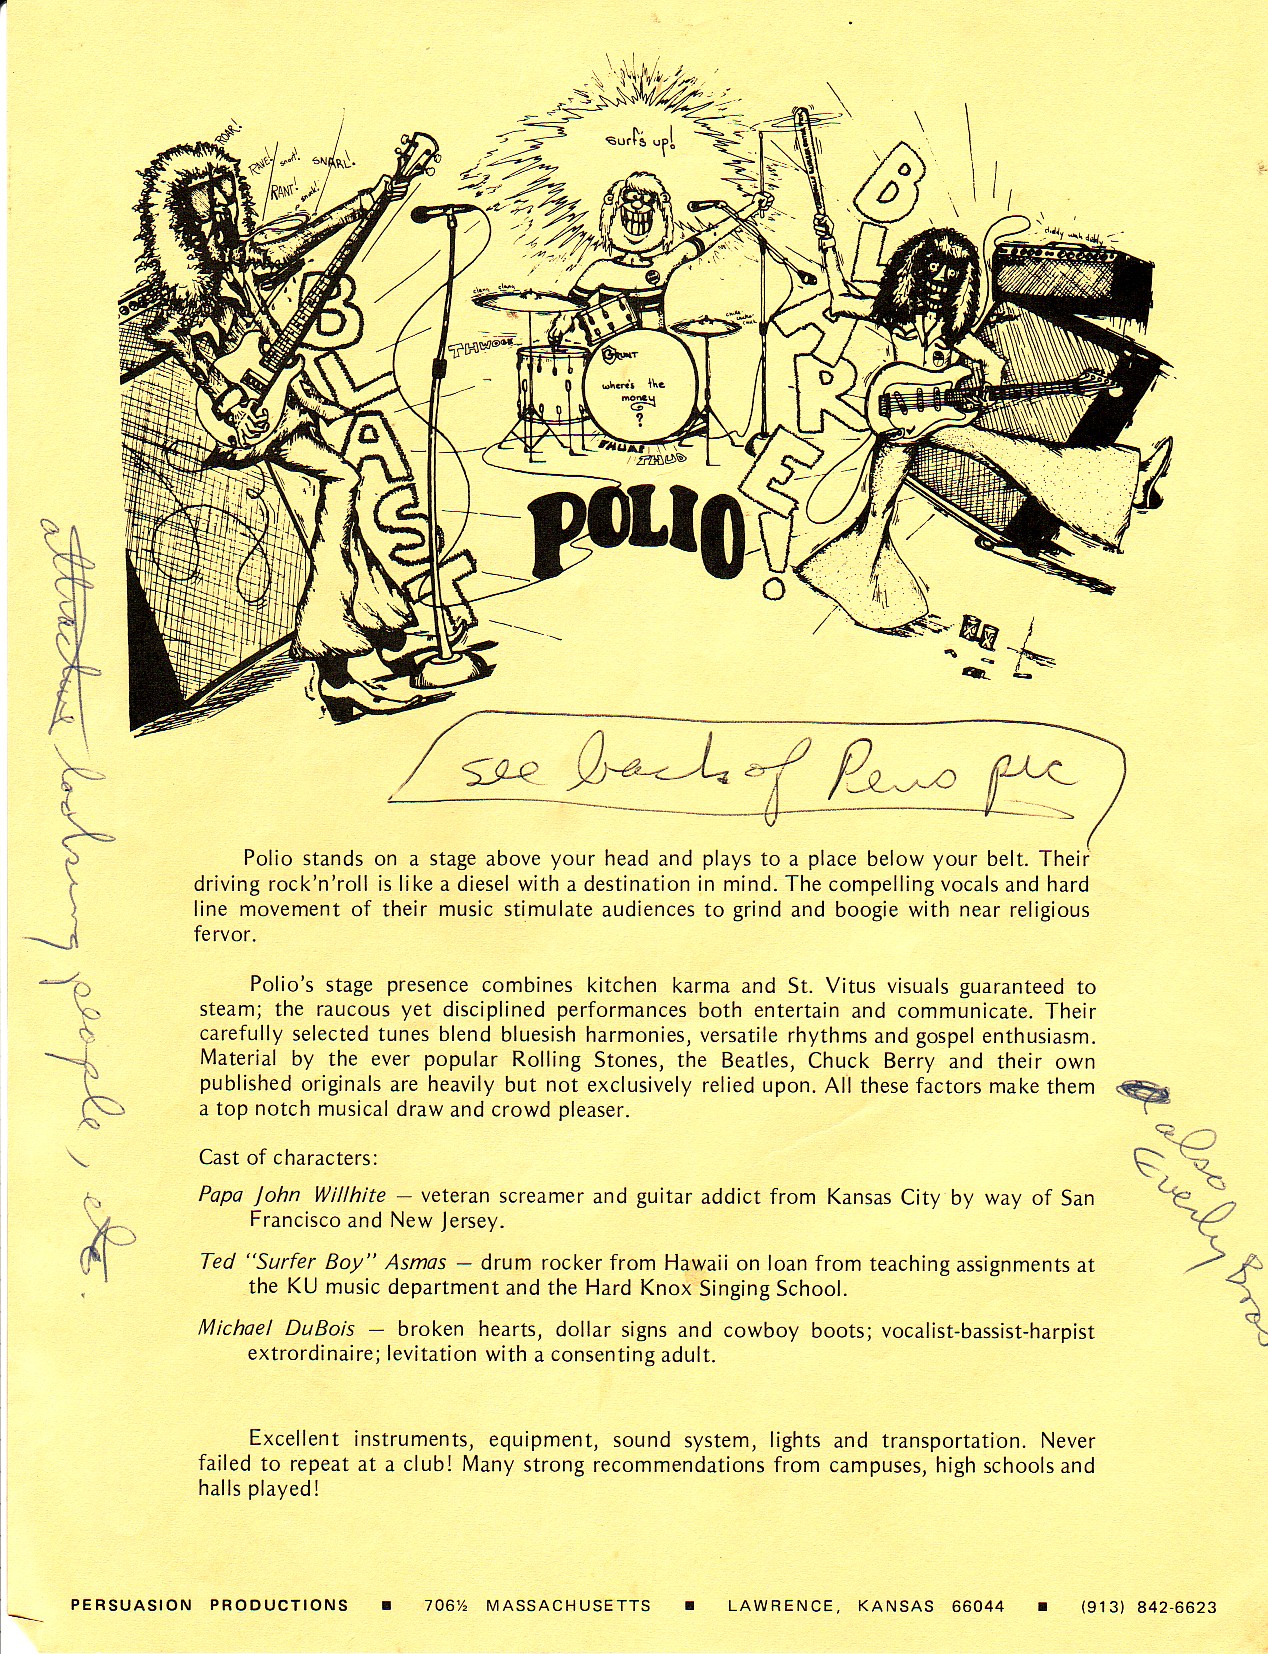 early publicity flyer for Polio